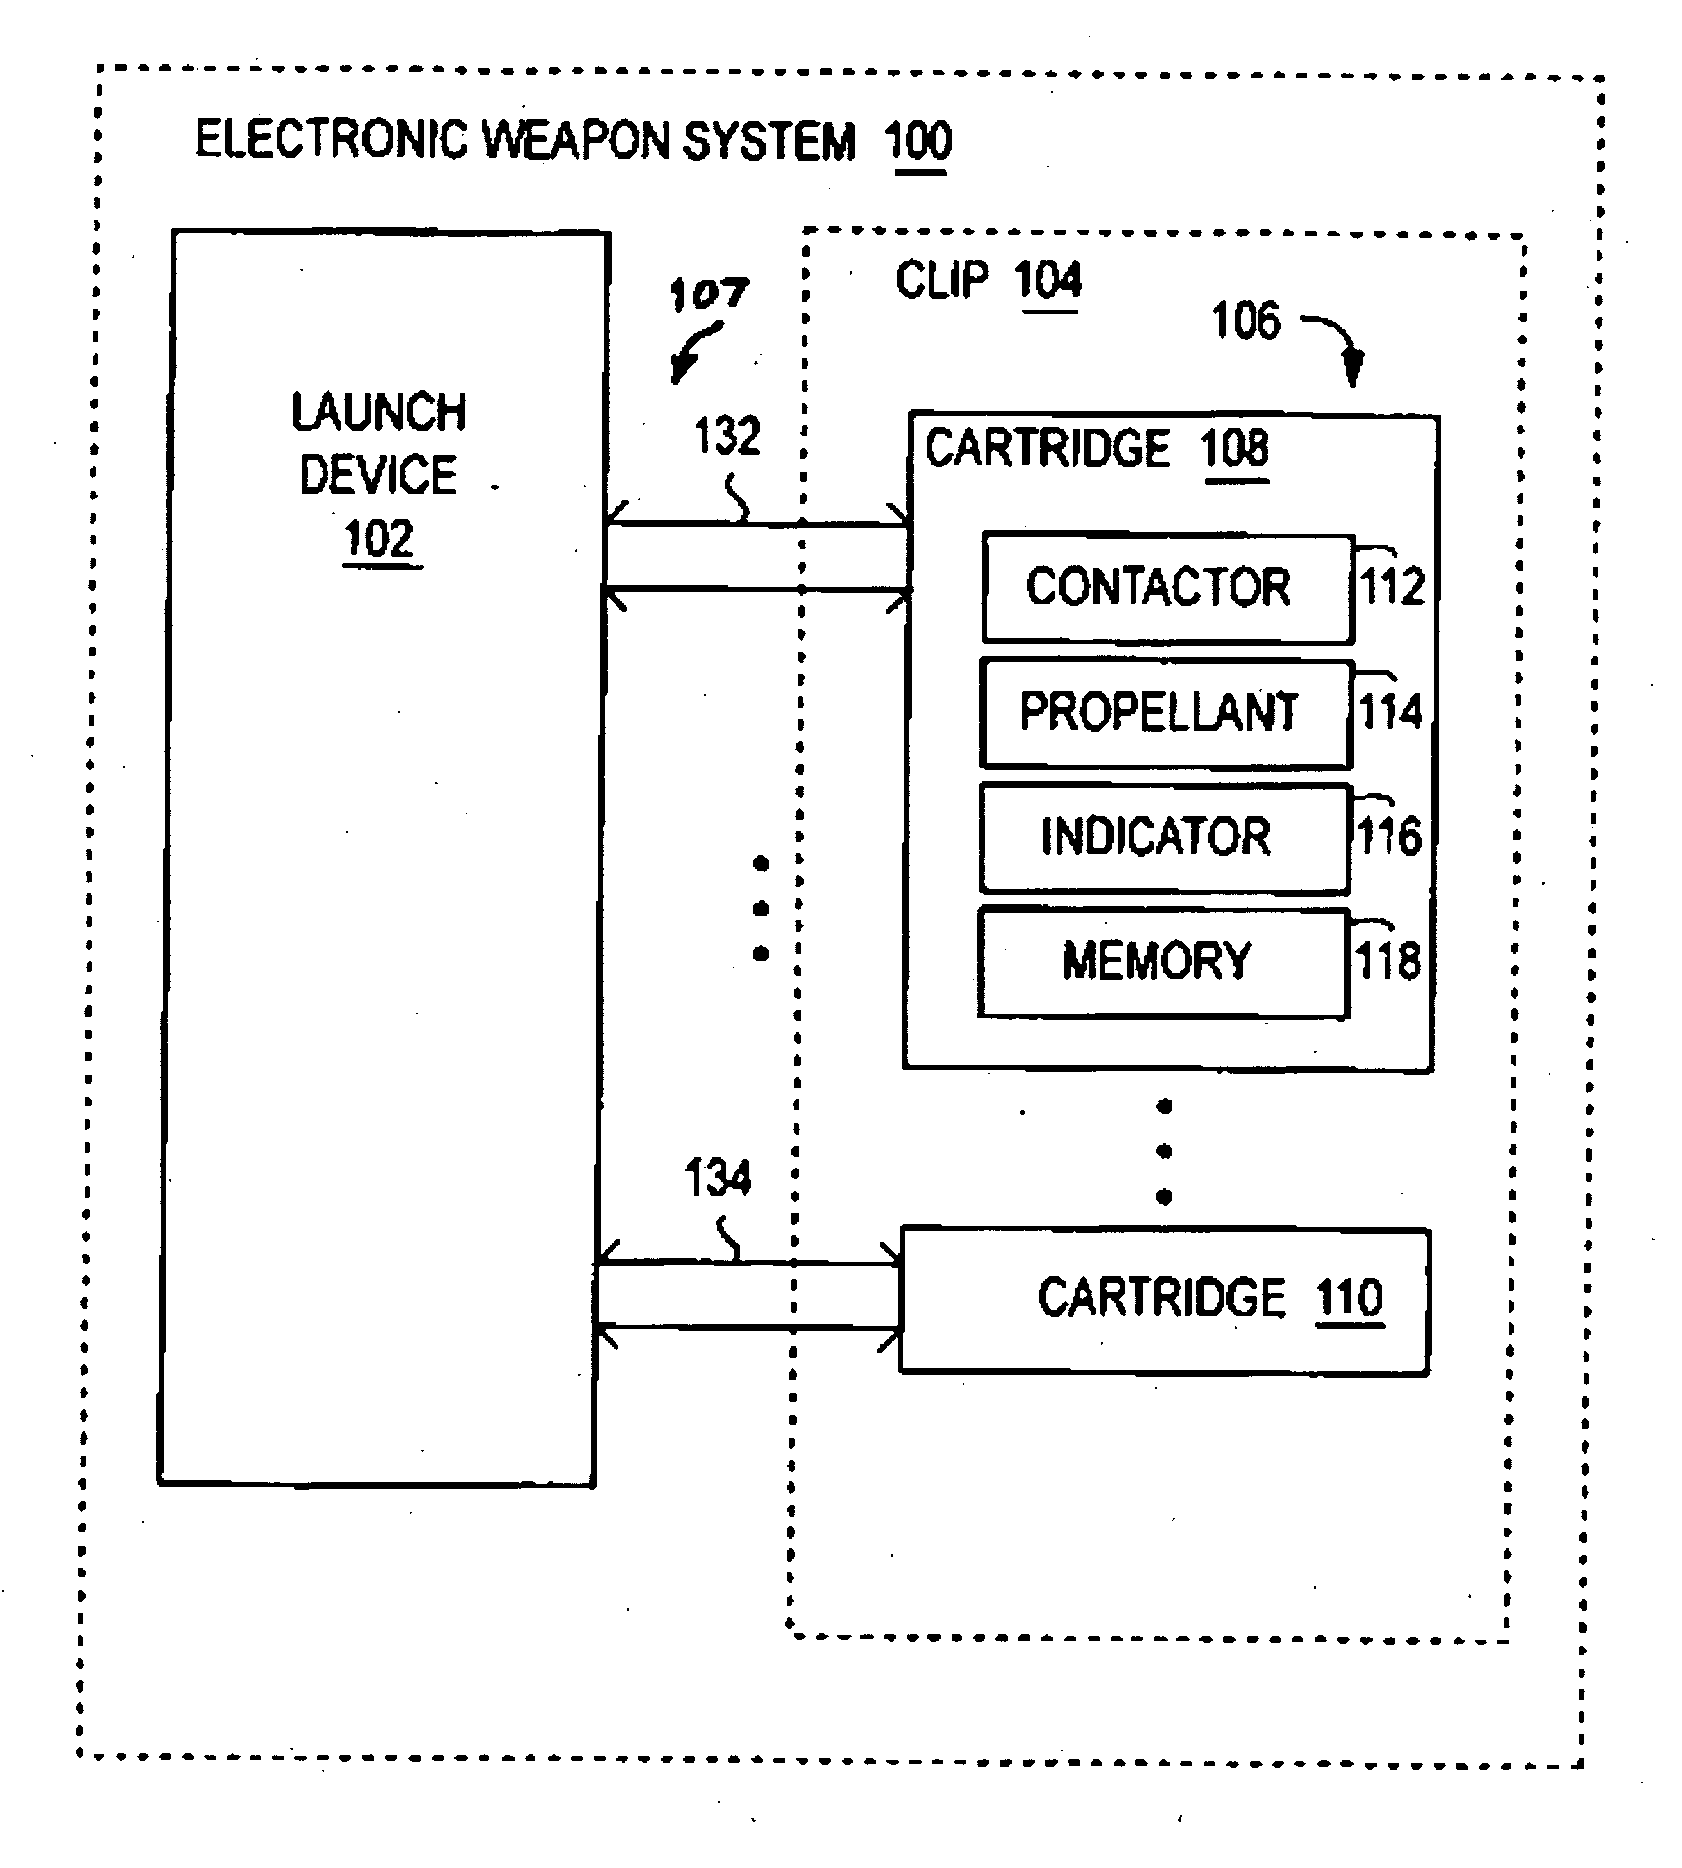 Systems and methods for activating a propellant for an electronic weapon